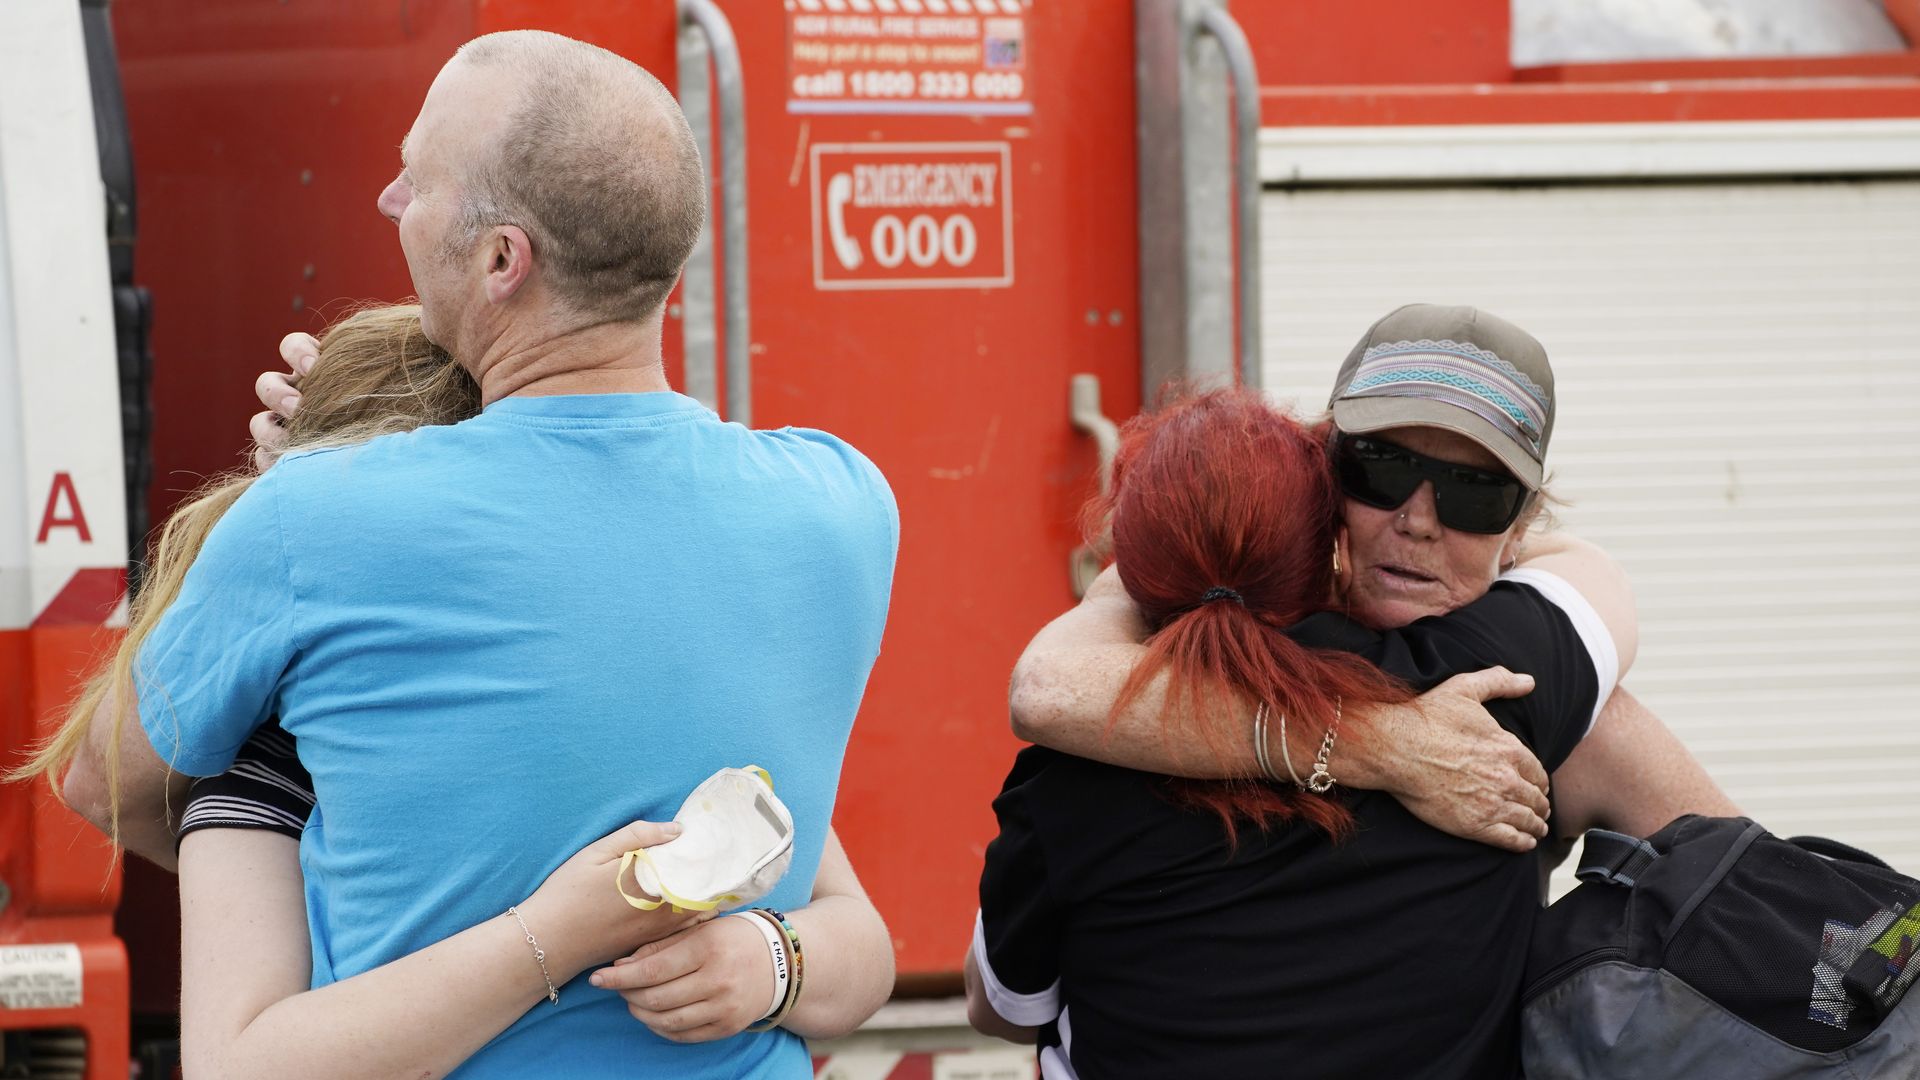 People are seen embracing at Numeralla Rural Fire Brigade near the scene of a water tanker plane crash in NSW